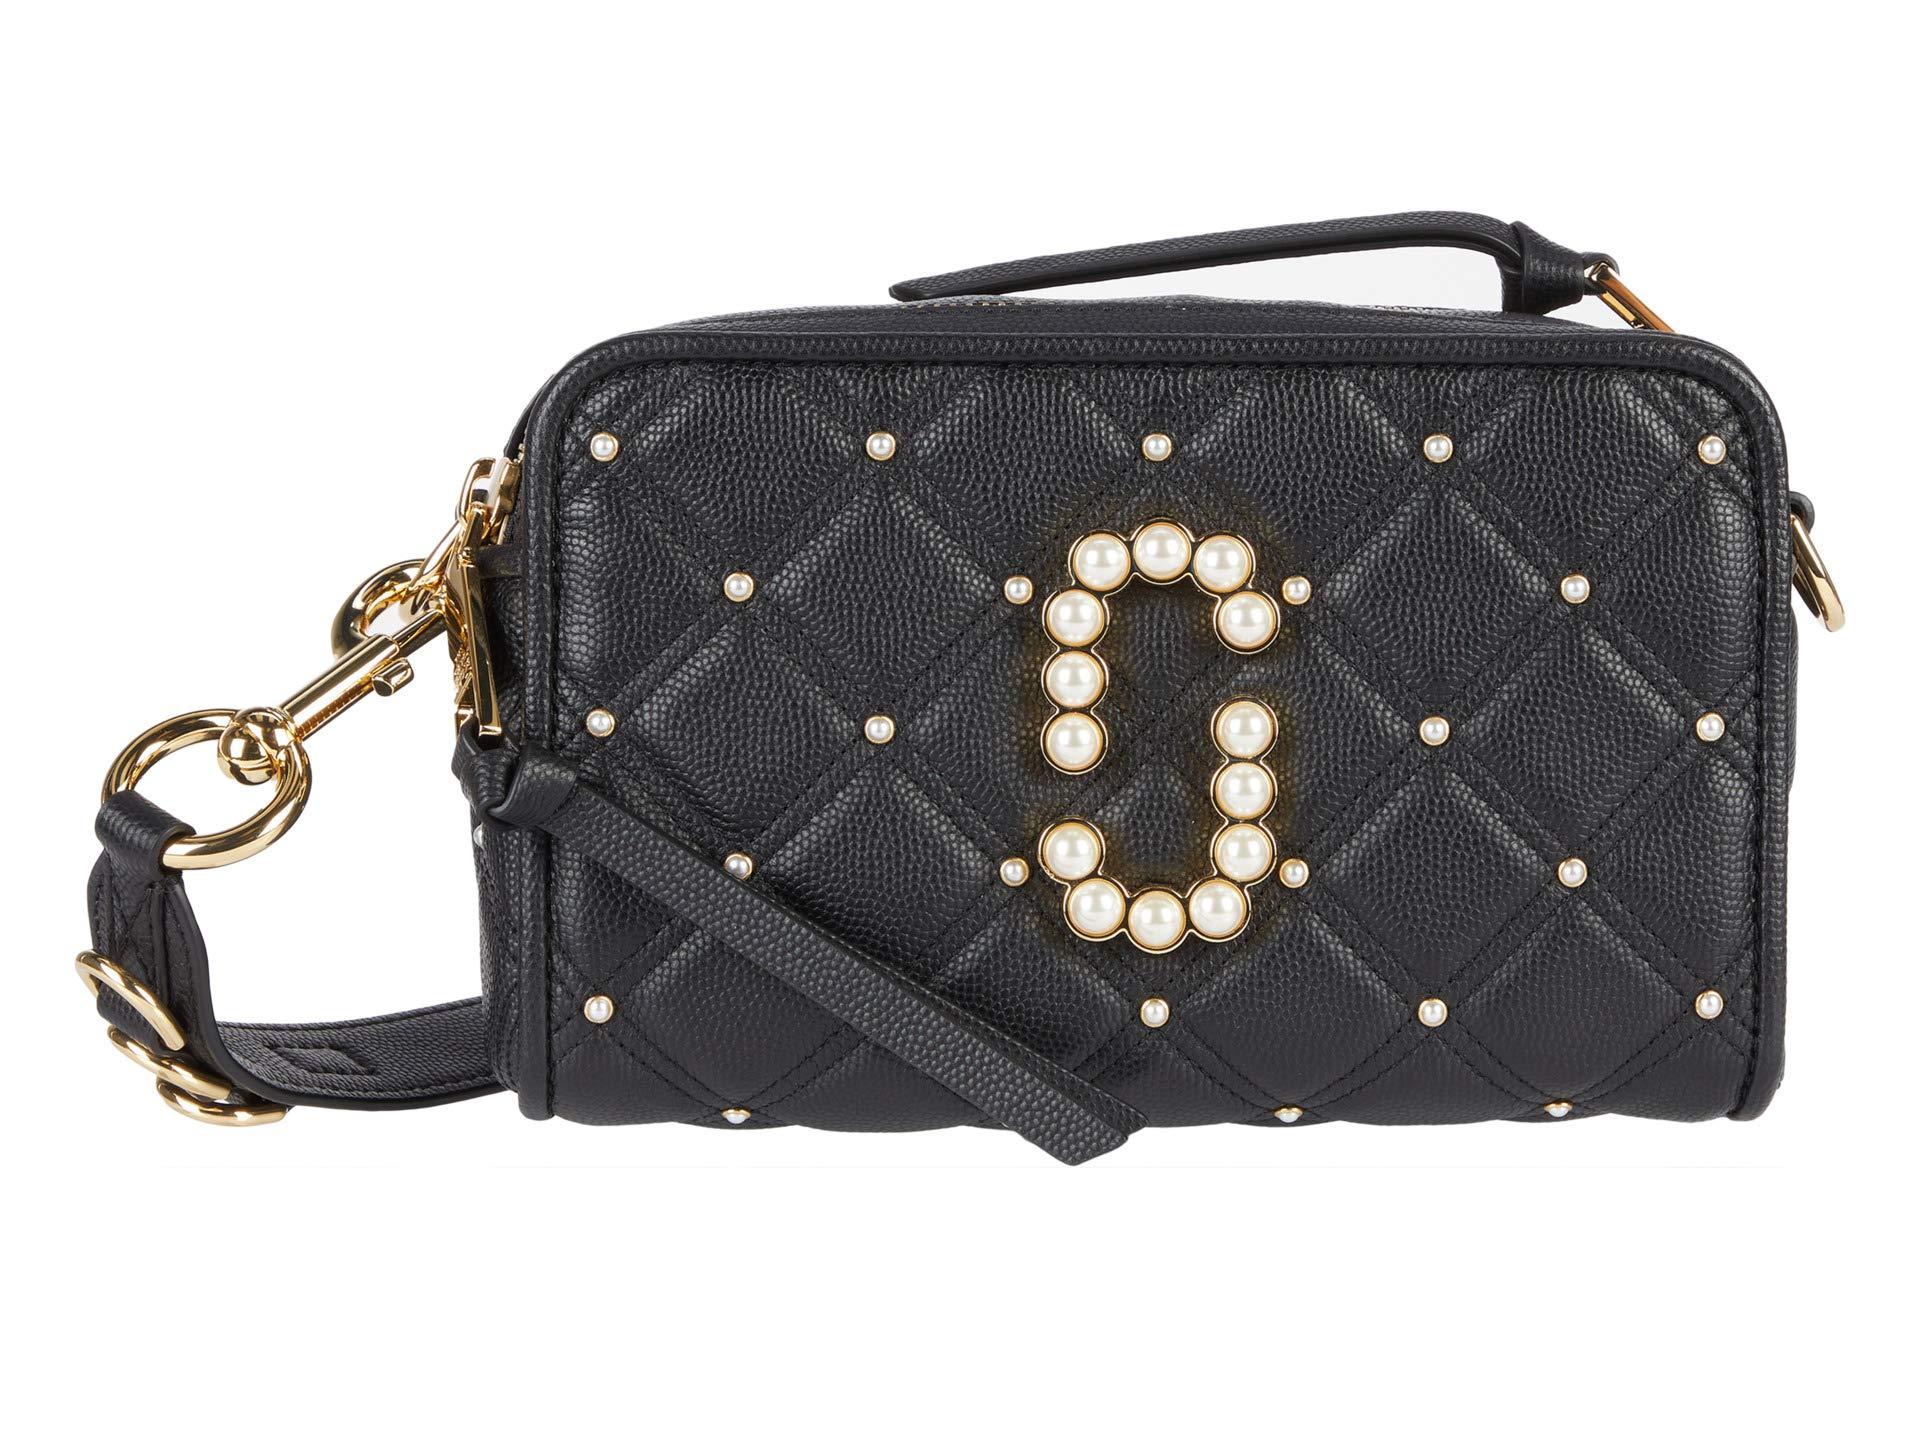 The Perfect Crossbody Bag For All Seasons: Marc Jacobs Snapshot Bag - By  Charlotte B